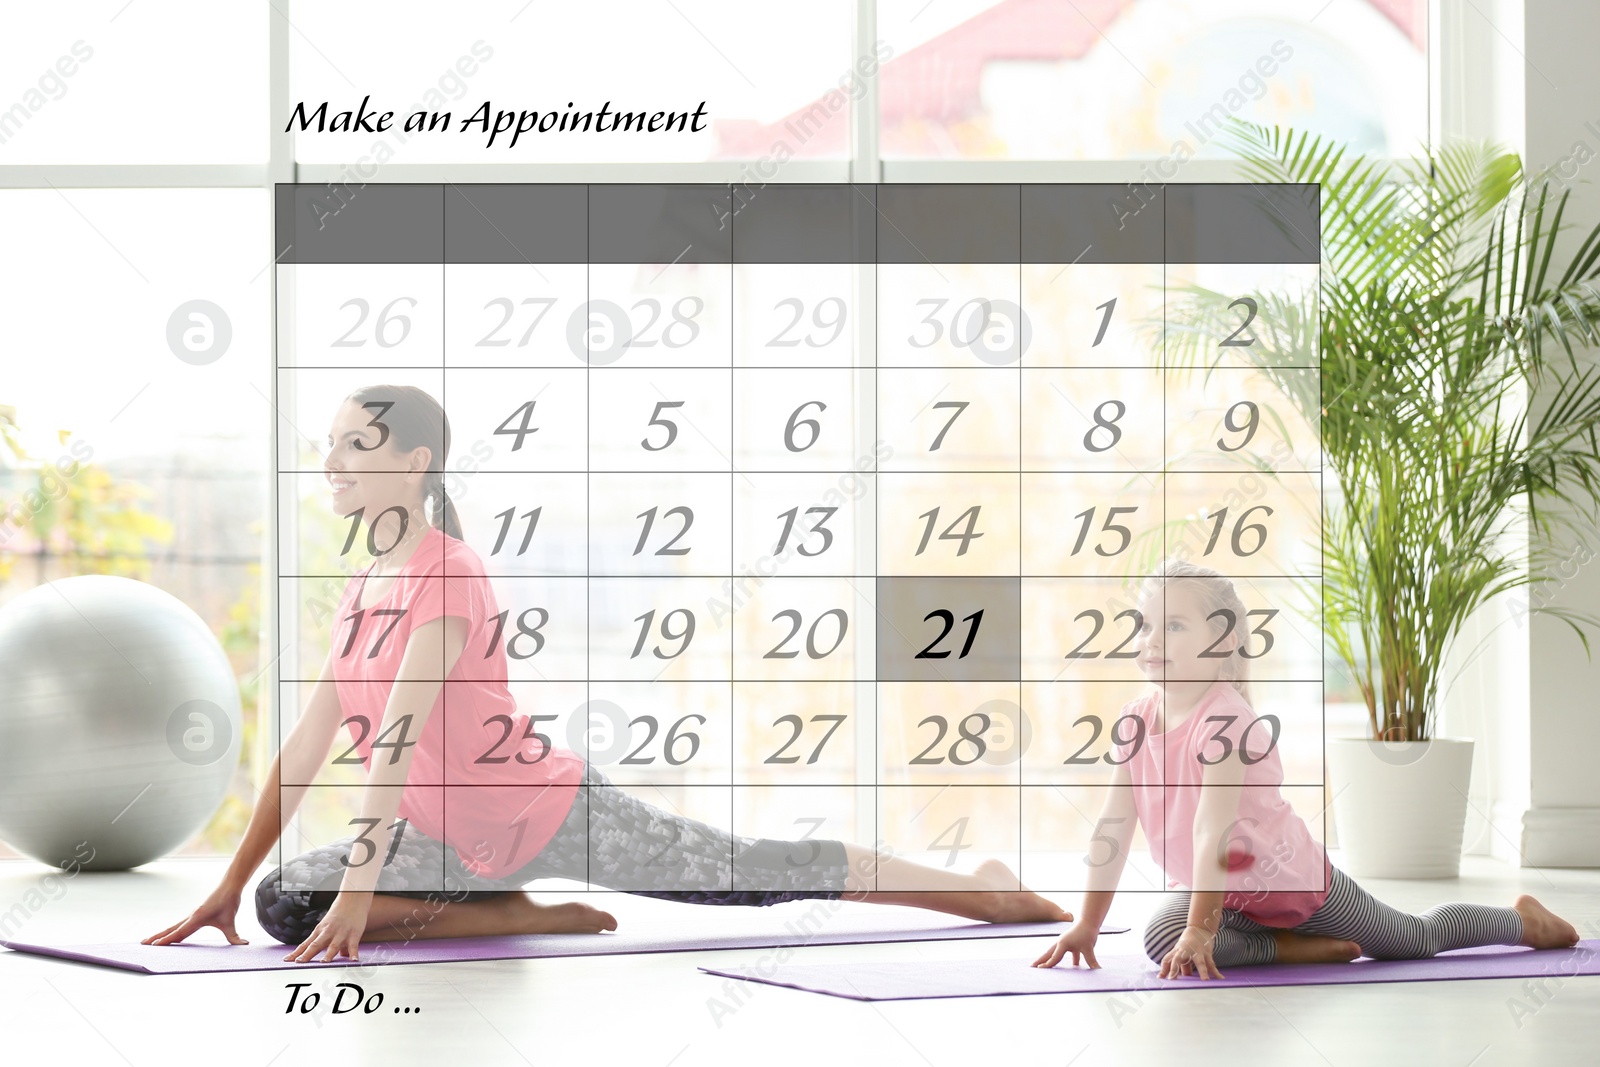 Image of Double exposure of calendar and family doing yoga together at home